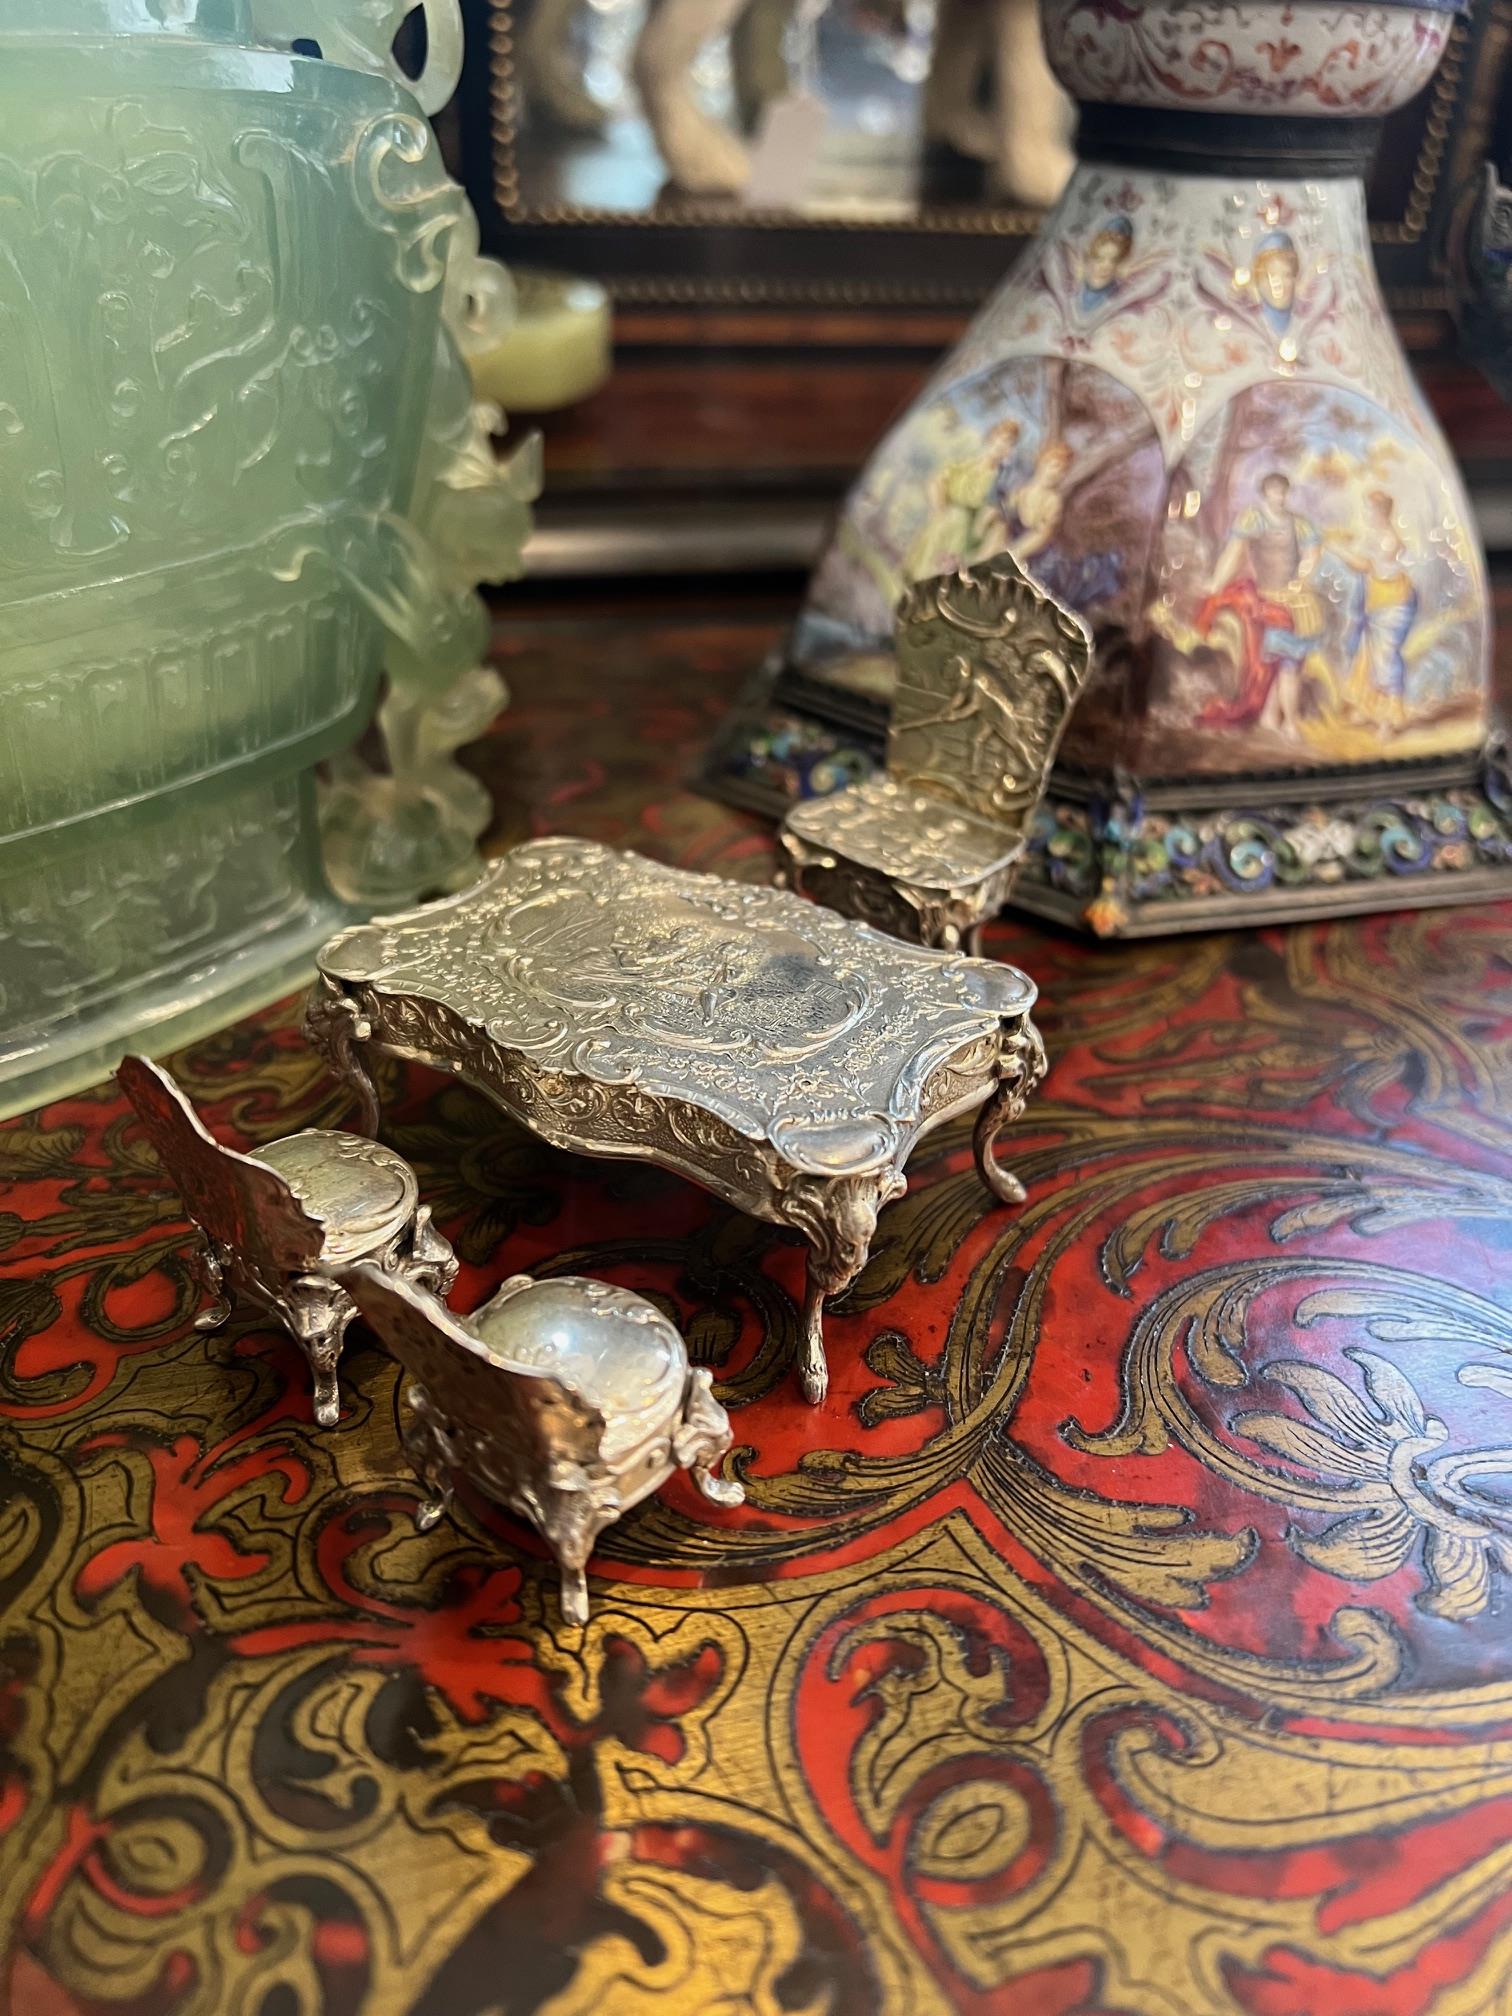 A SET OF EARLY 20TH CENTURY SILVER MINIATURE FURNITURE, C.1900 - Image 4 of 6